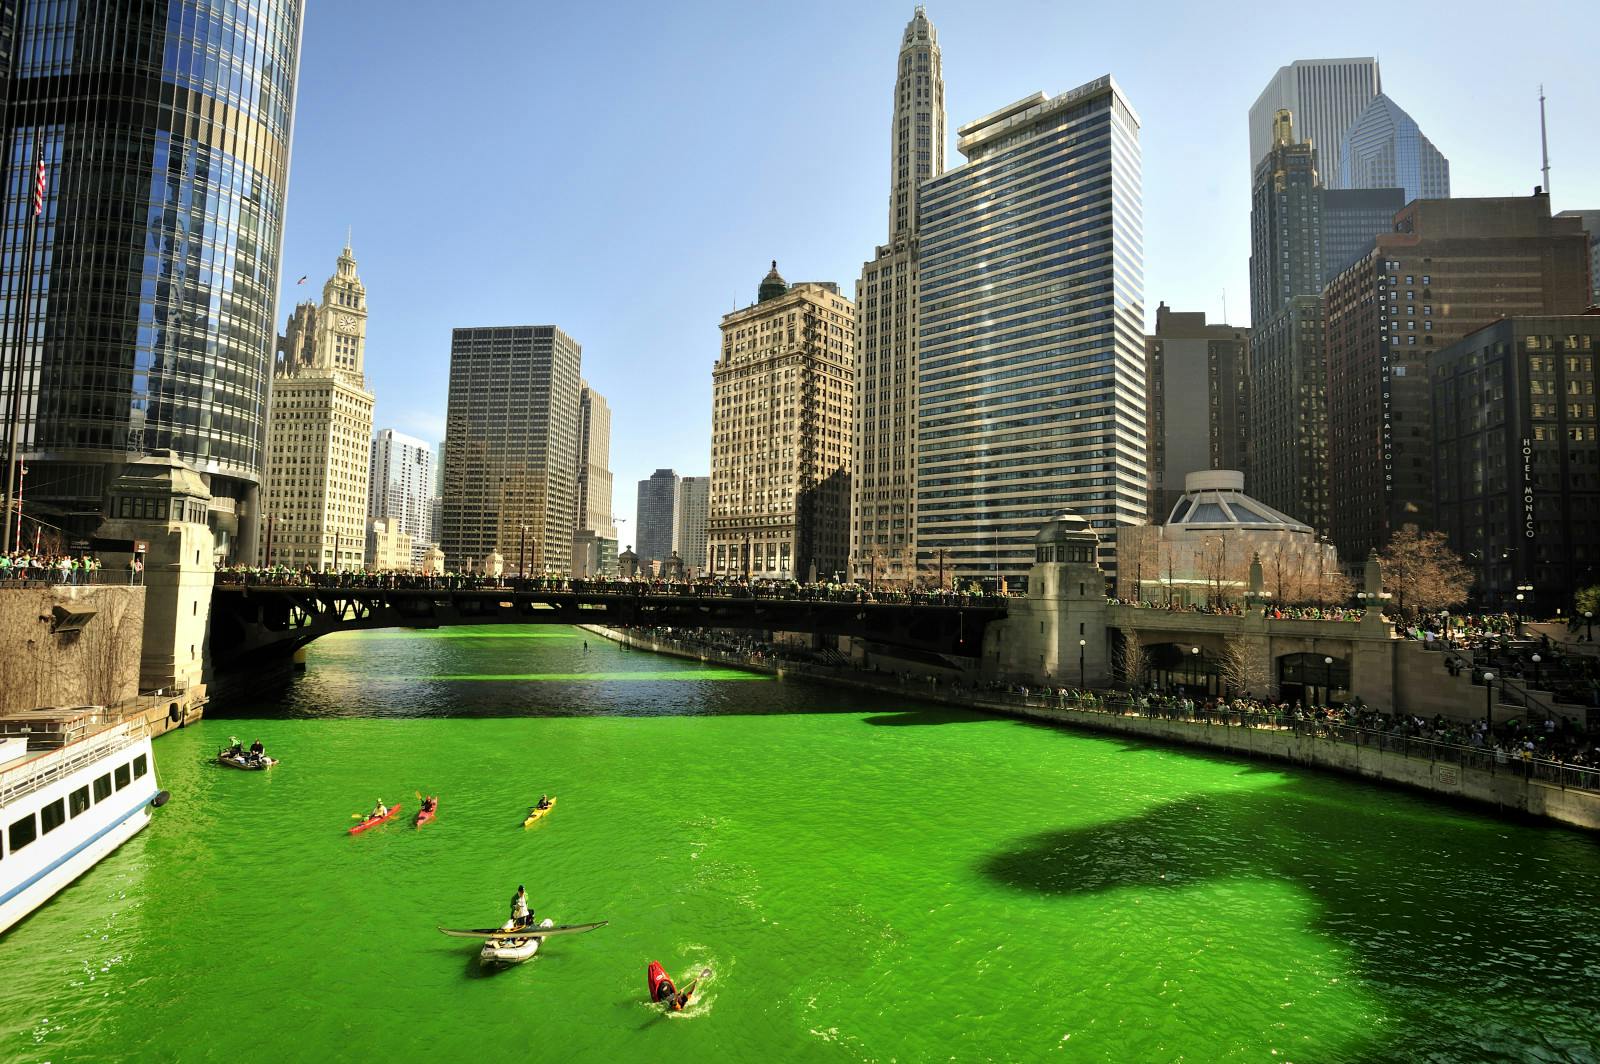 Meet the Indian Family Behind Chicago’s St. Patrick’s Day Celebrations